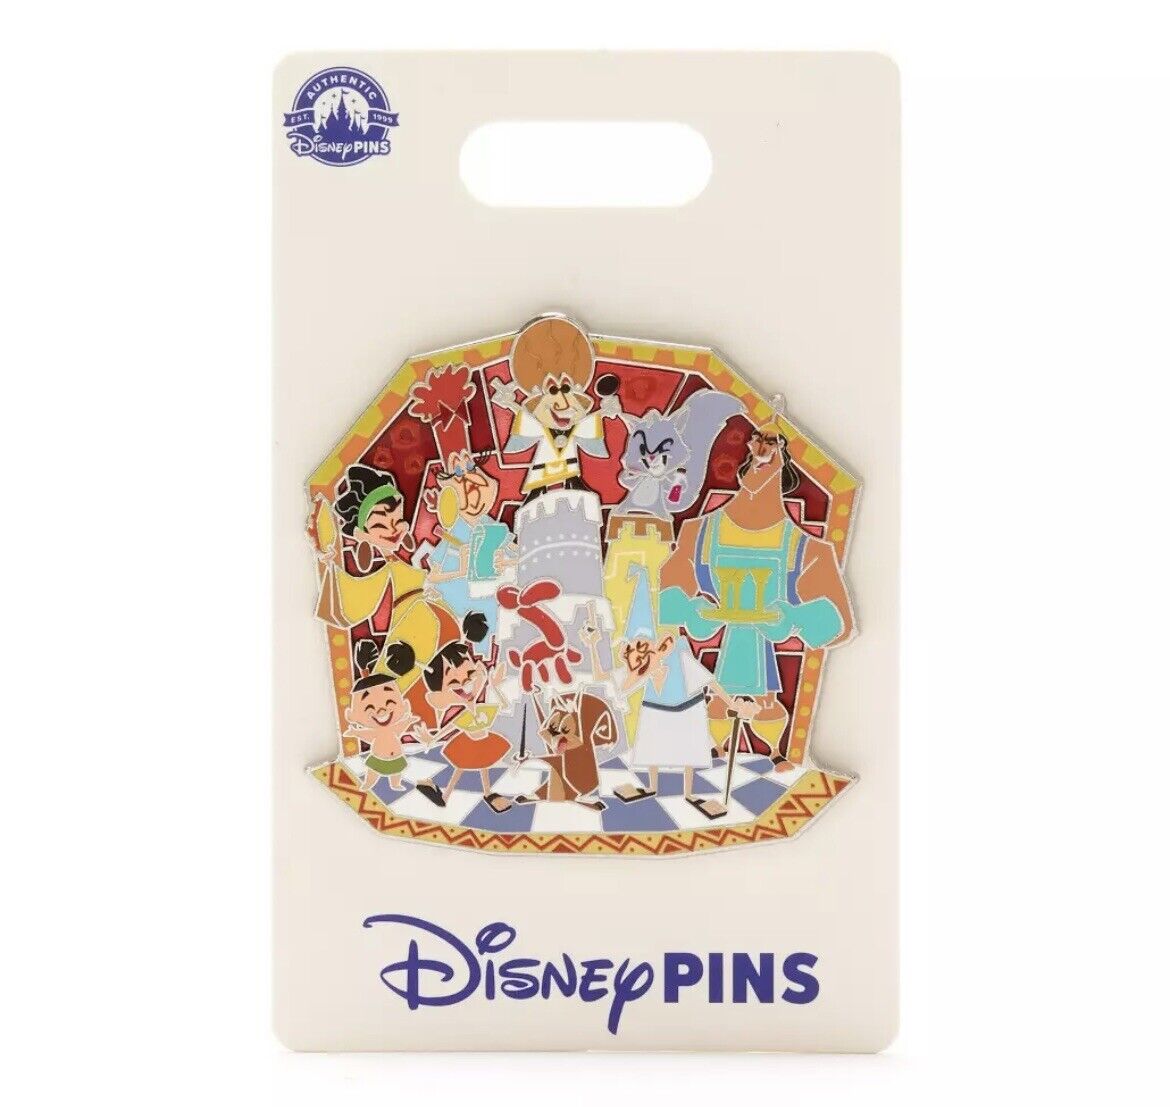 Disney Parks Emperor's New Groove Cluster Family Trading Pin Kronk Yzma - NEW